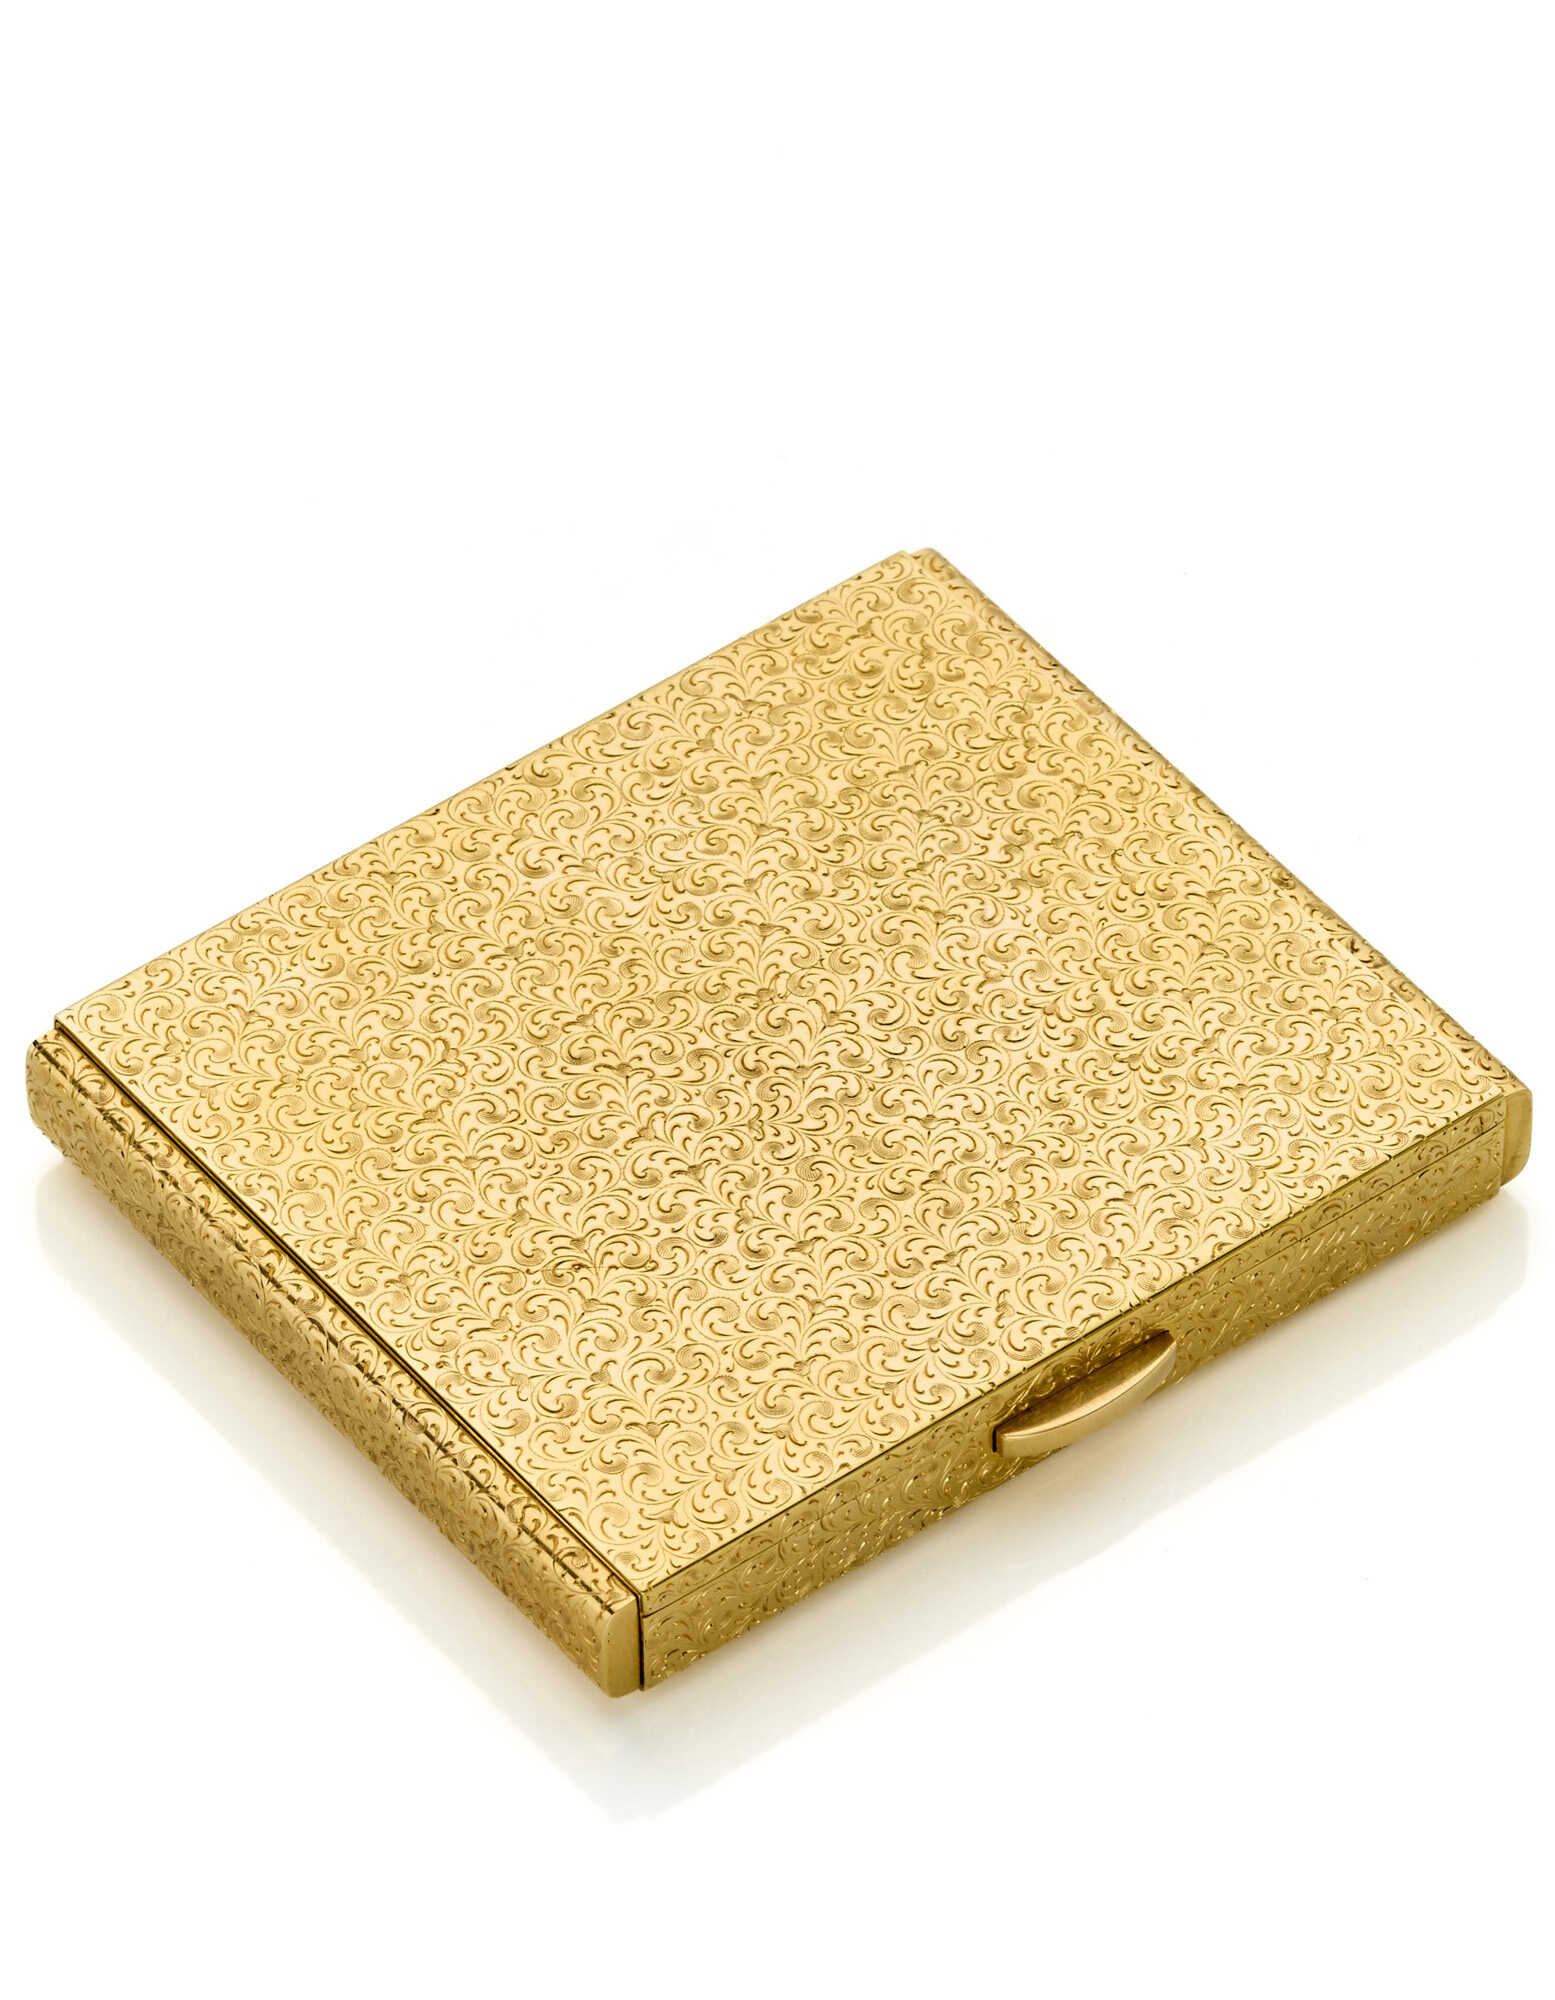 Yellow chiseled gold rectangular compact case with…